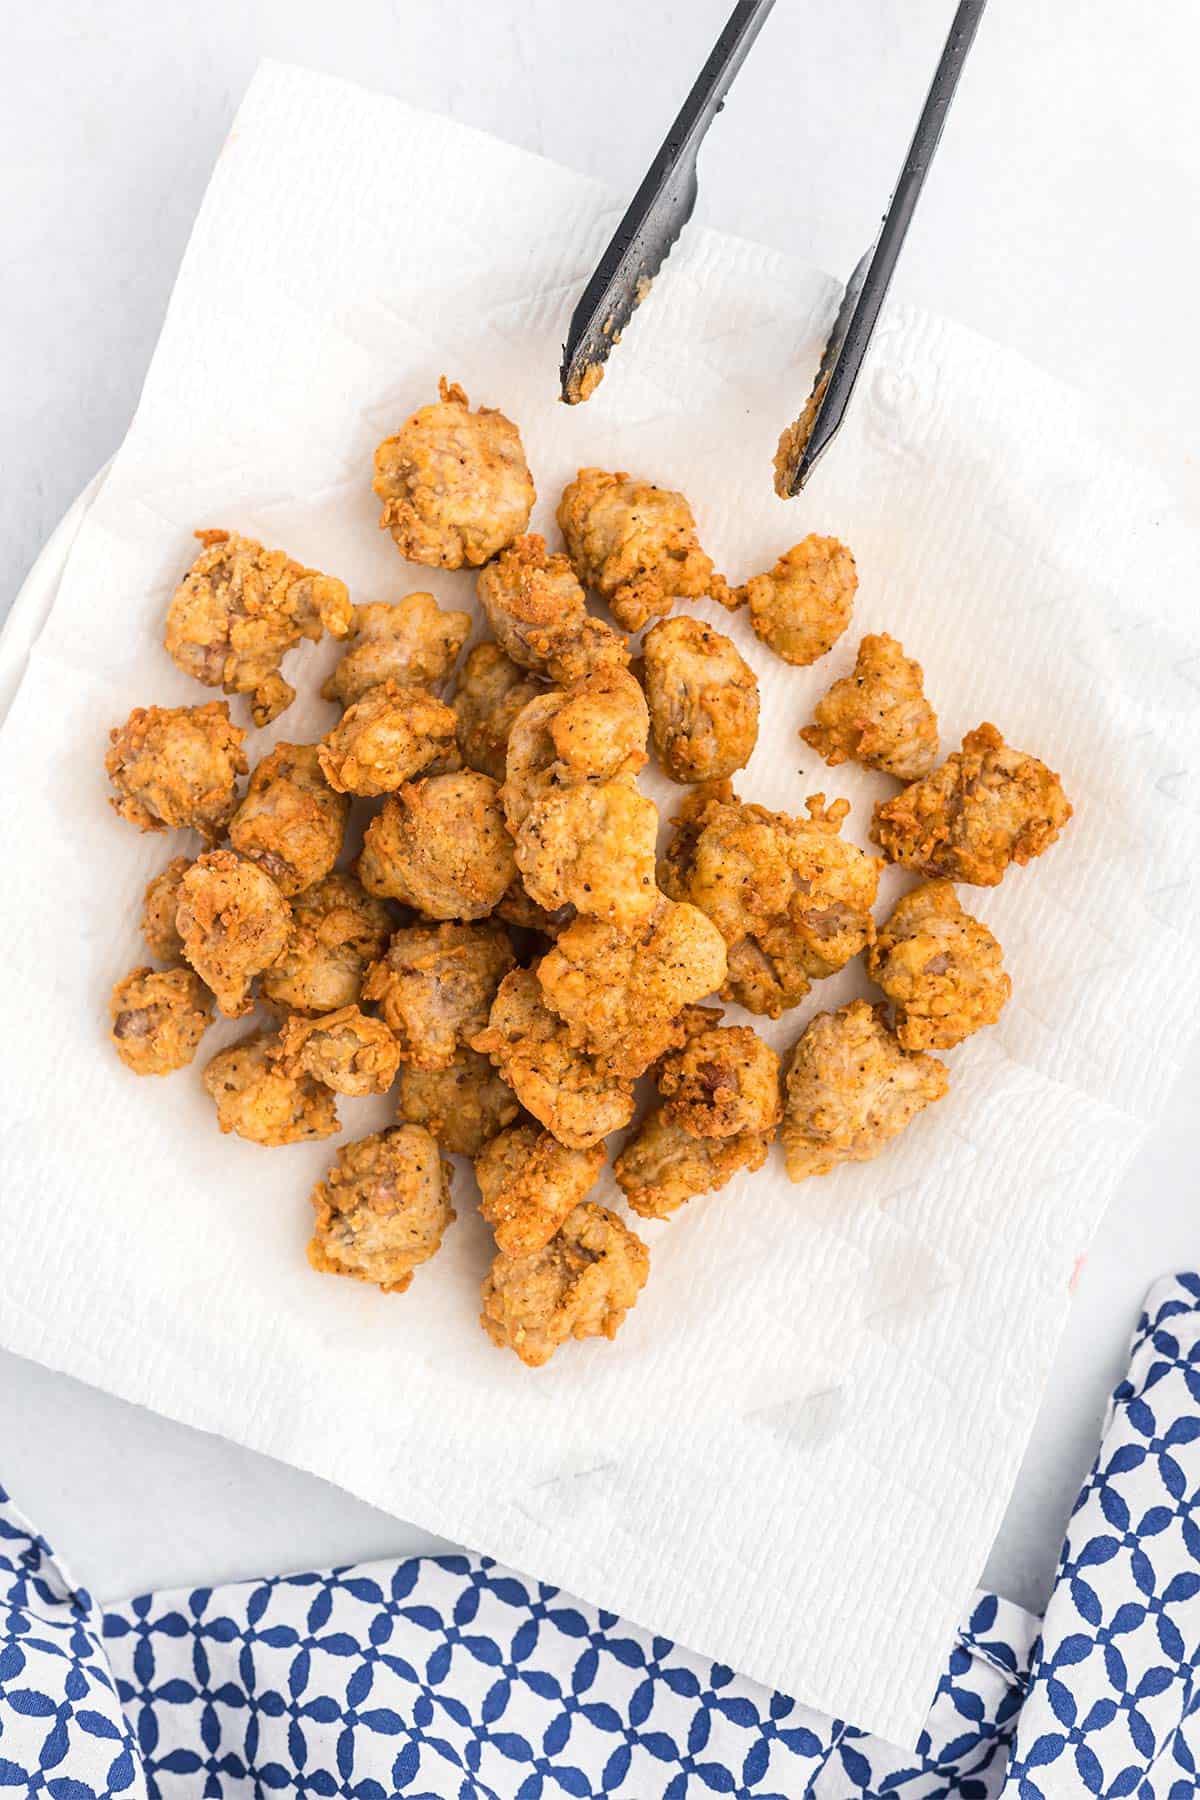 Fried chicken gizzards draining on a paper towel